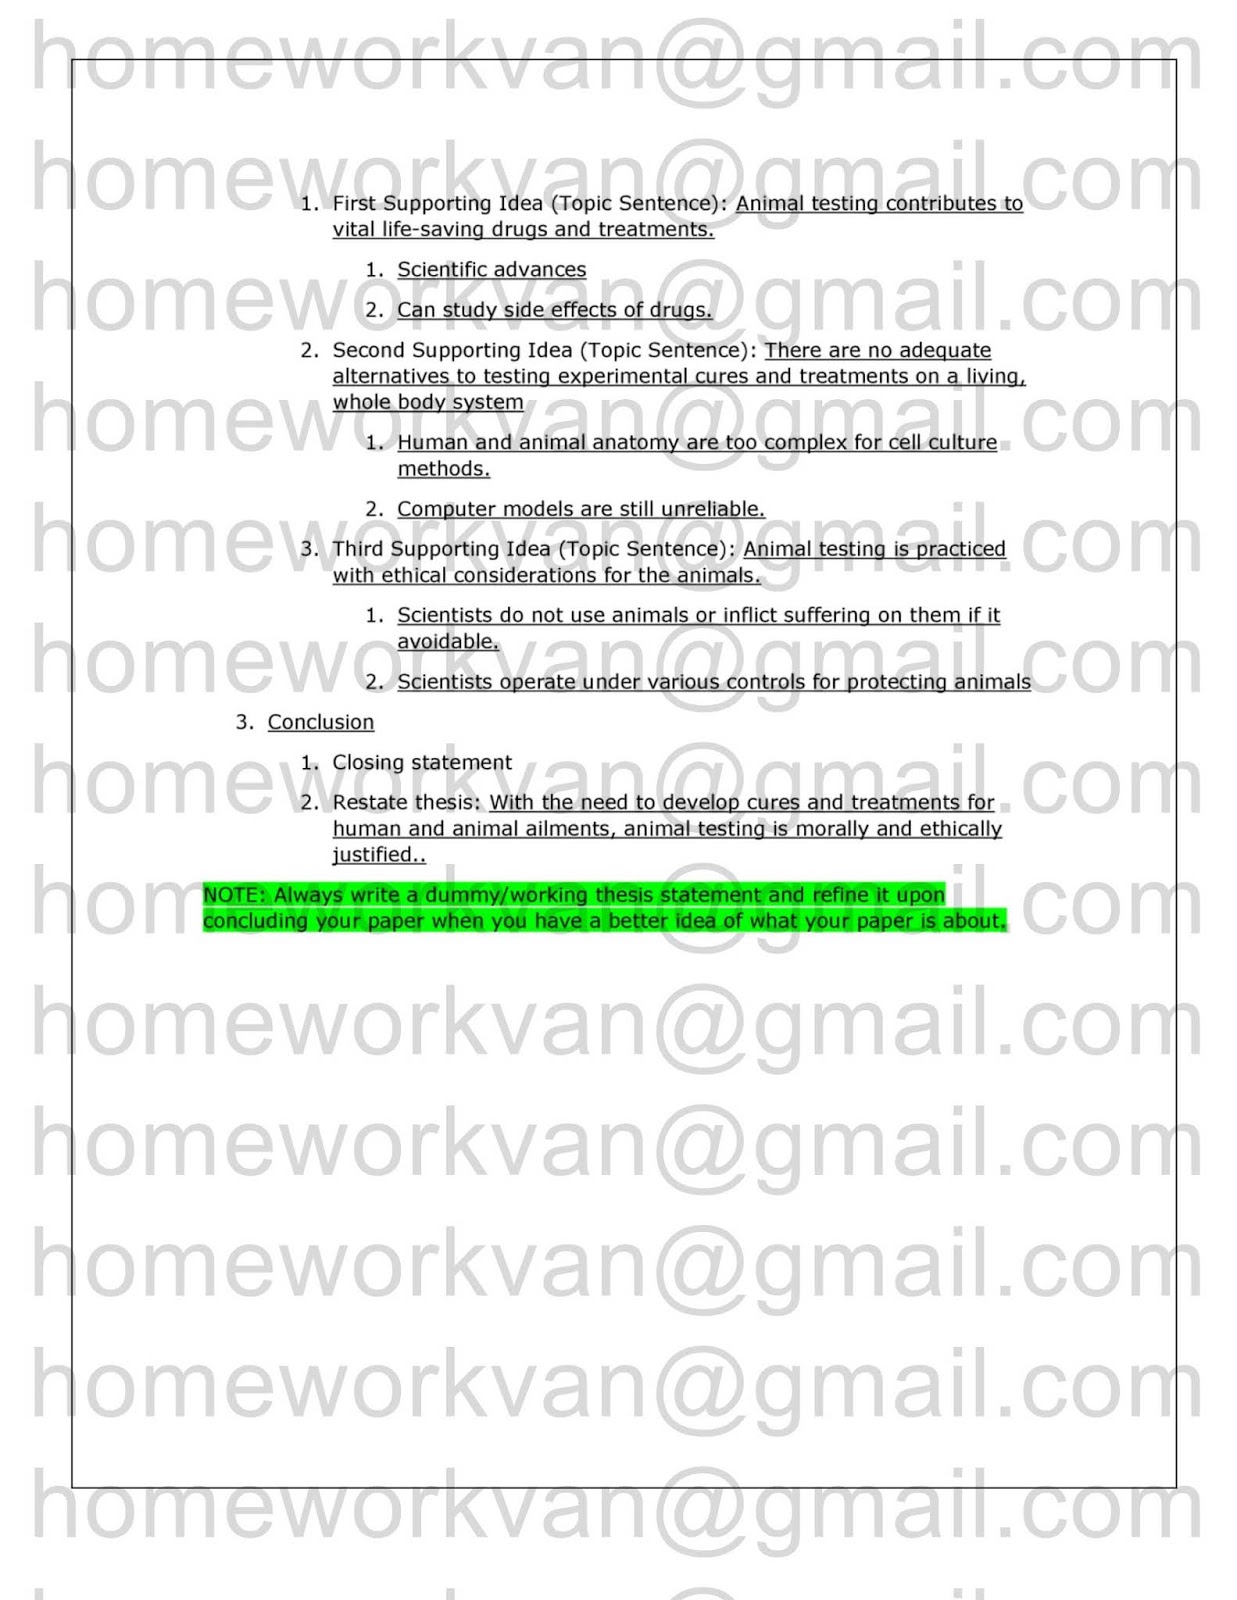 homeworkvan official blog 대학교영어 과제 전문 컨설팅 - Since 2014: Academic Essay  Tutorial - Chapter 5: Developing your Paper - by homeworkvan